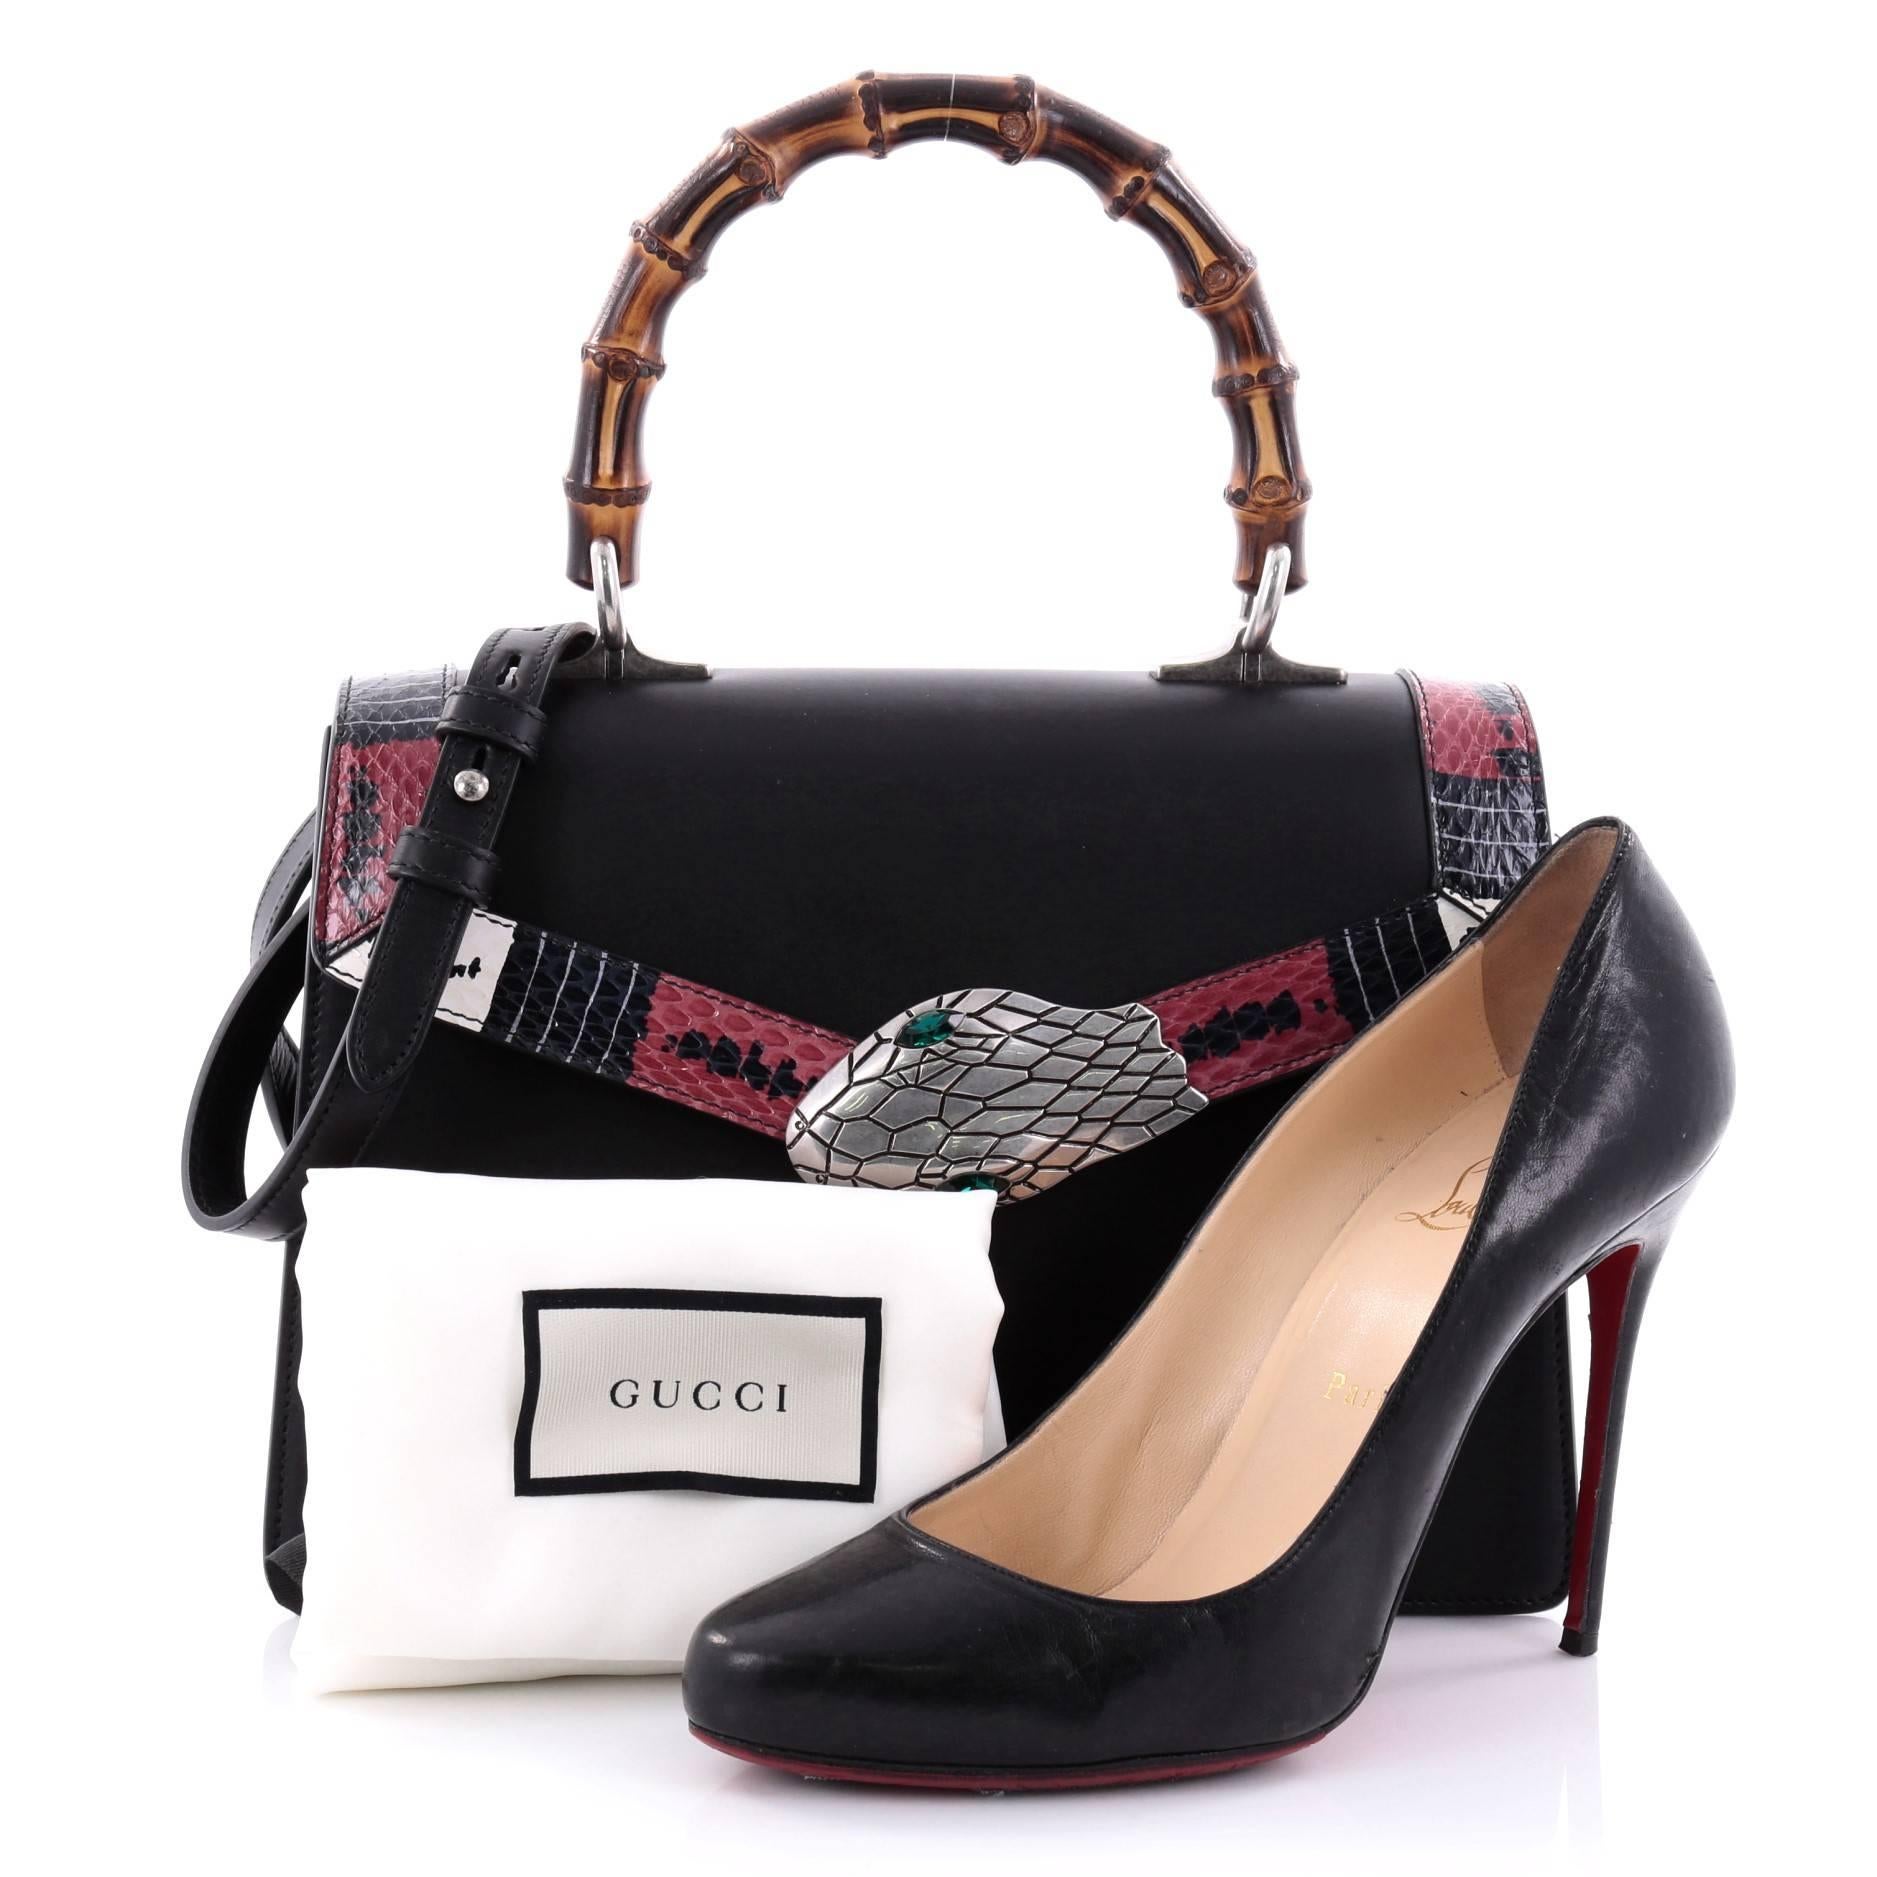 This authentic Gucci Lilith Top Handle Bag Leather with Snakeskin Small is the perfect statement piece. Crafted in black leather, this bag features bamboo top handle, printed genuine snakeskin detail along the flap, Kingsnake closure, and